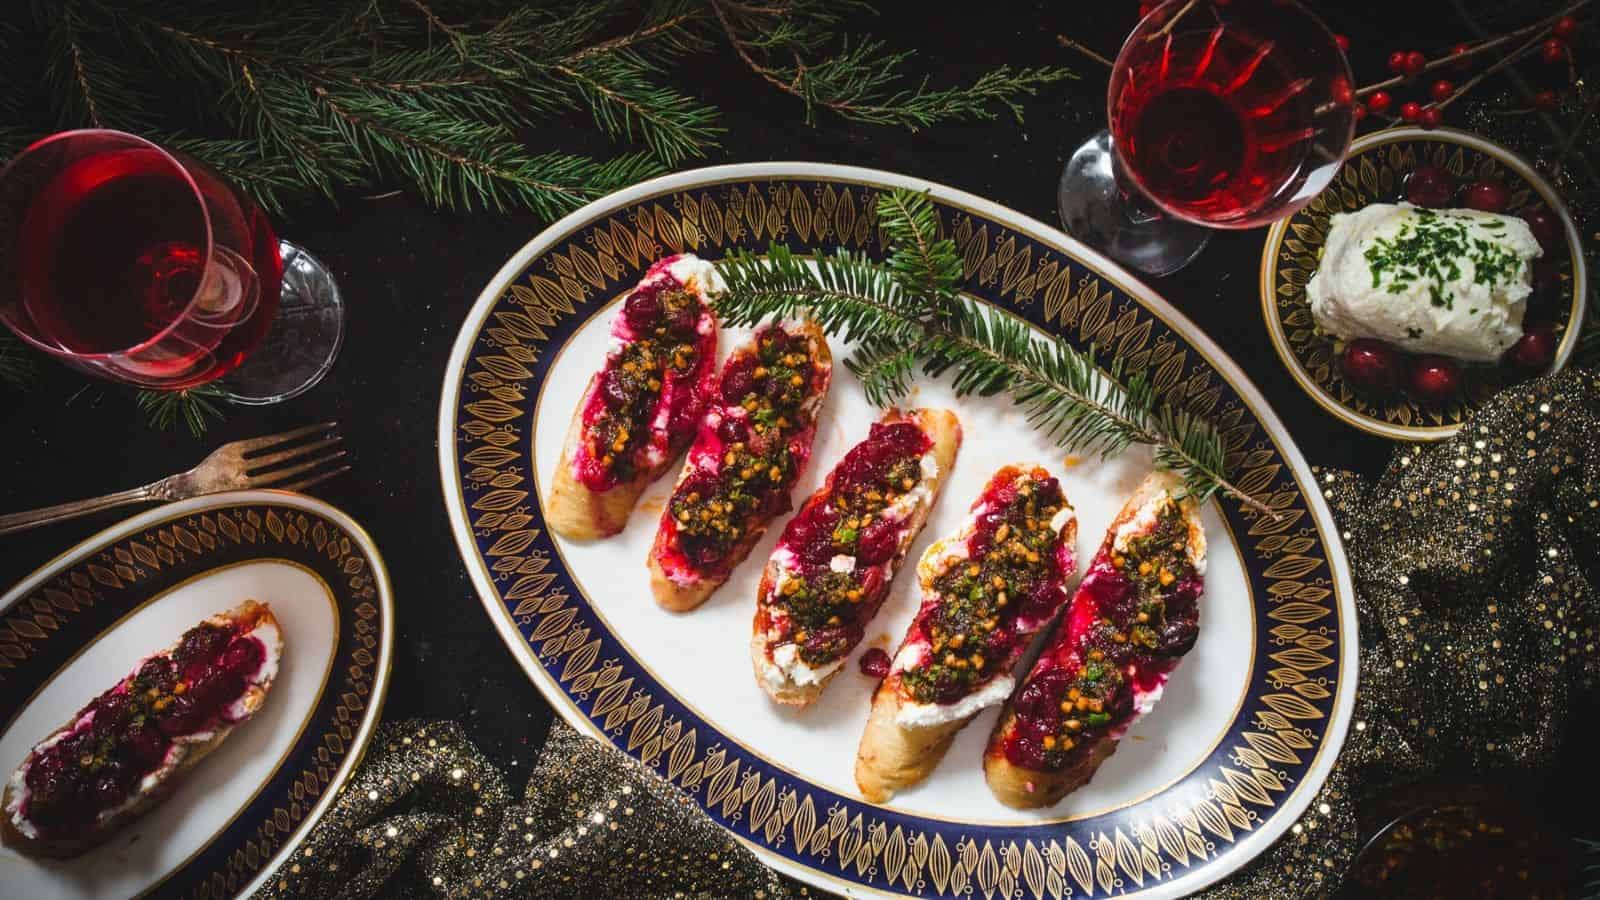 Cranberry bruschetta with pistachios and cranberries on a plate.